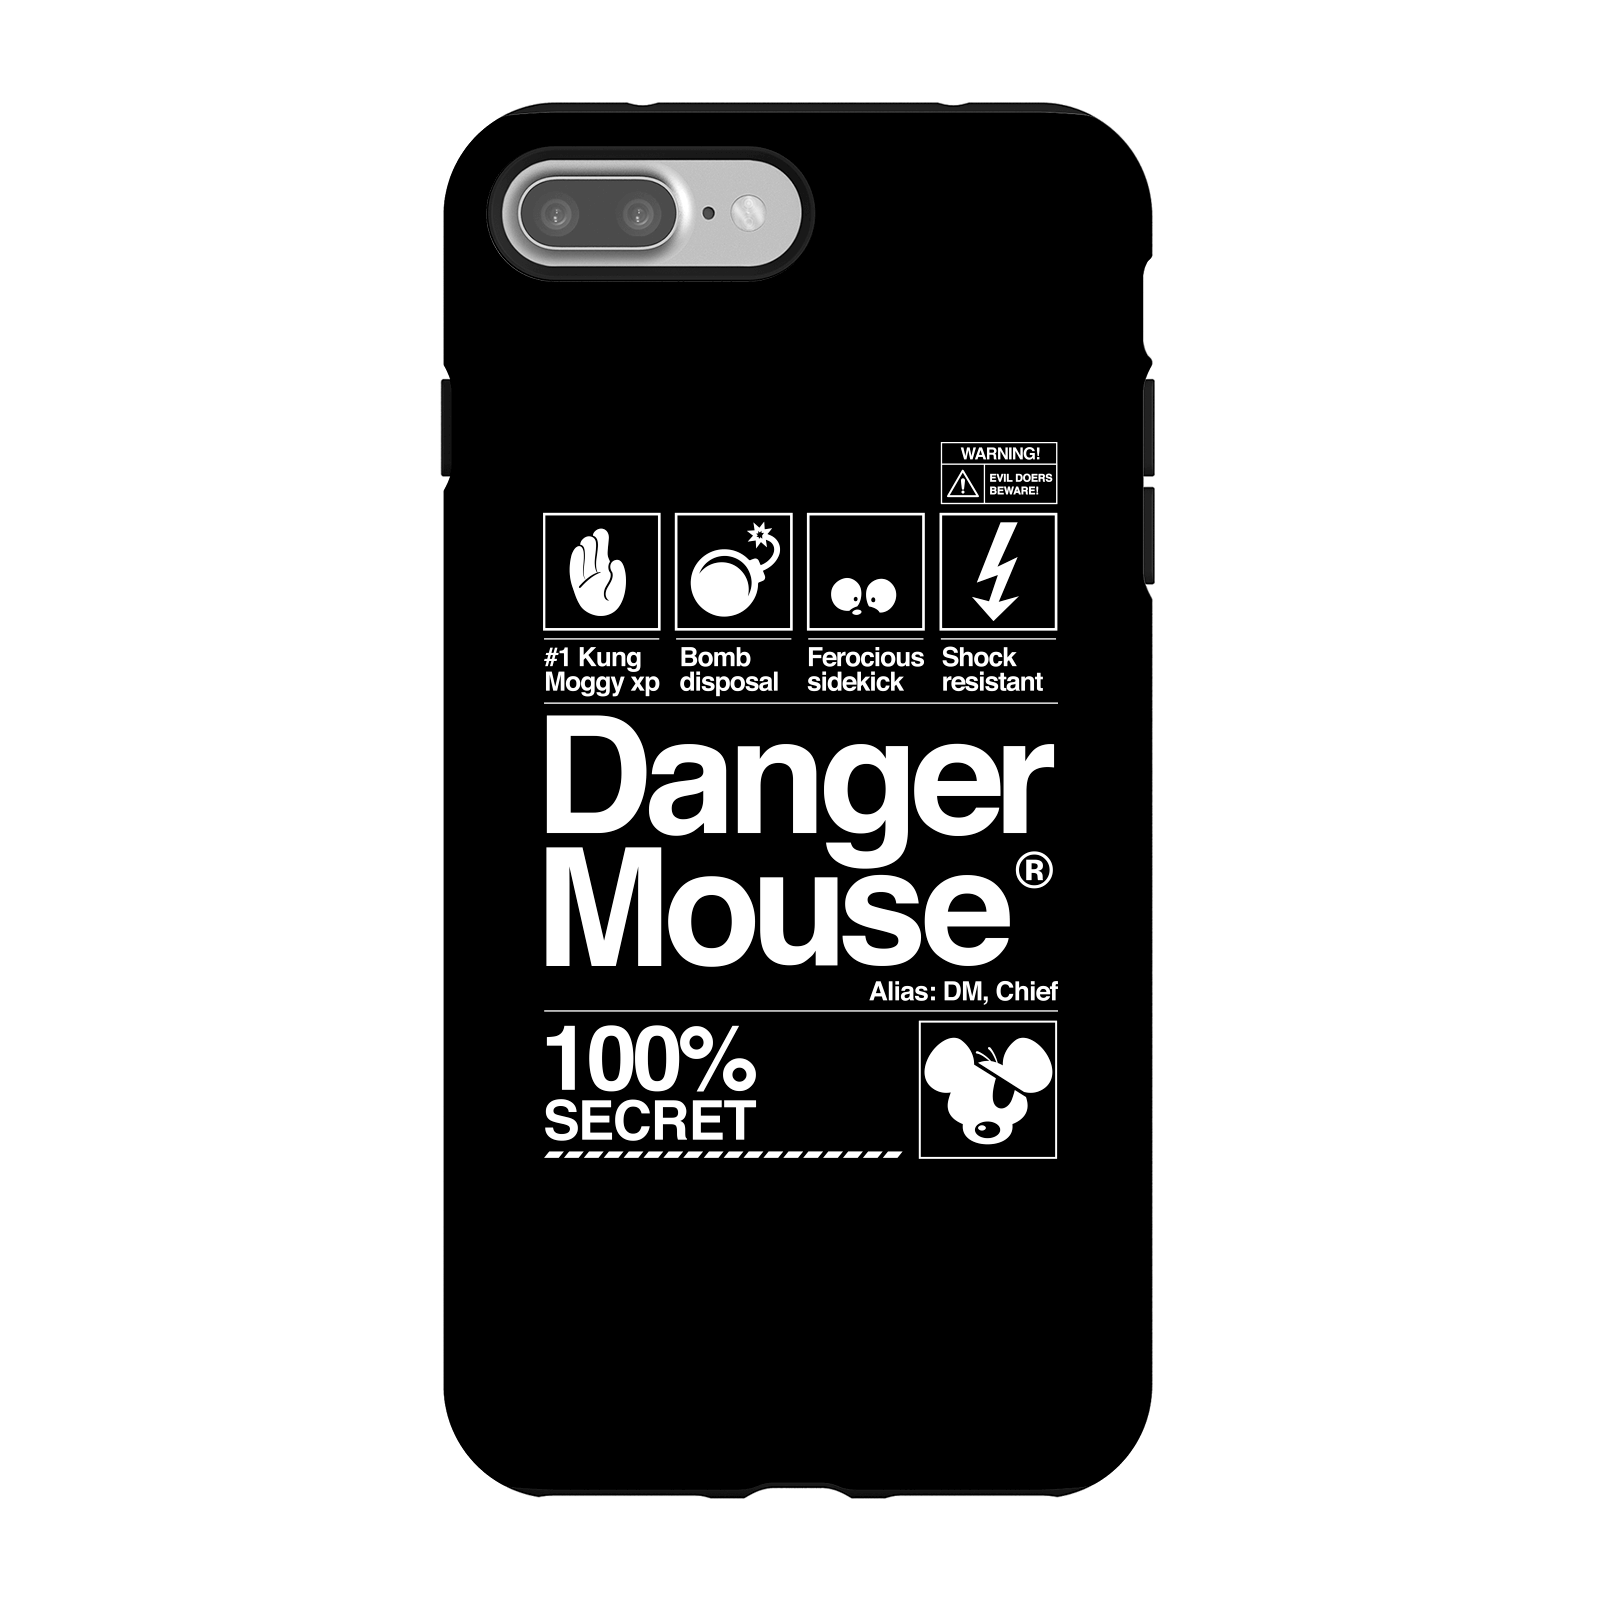 Danger Mouse 100% Secret Phone Case for iPhone and Android - iPhone 7 Plus - Tough Case - Matte